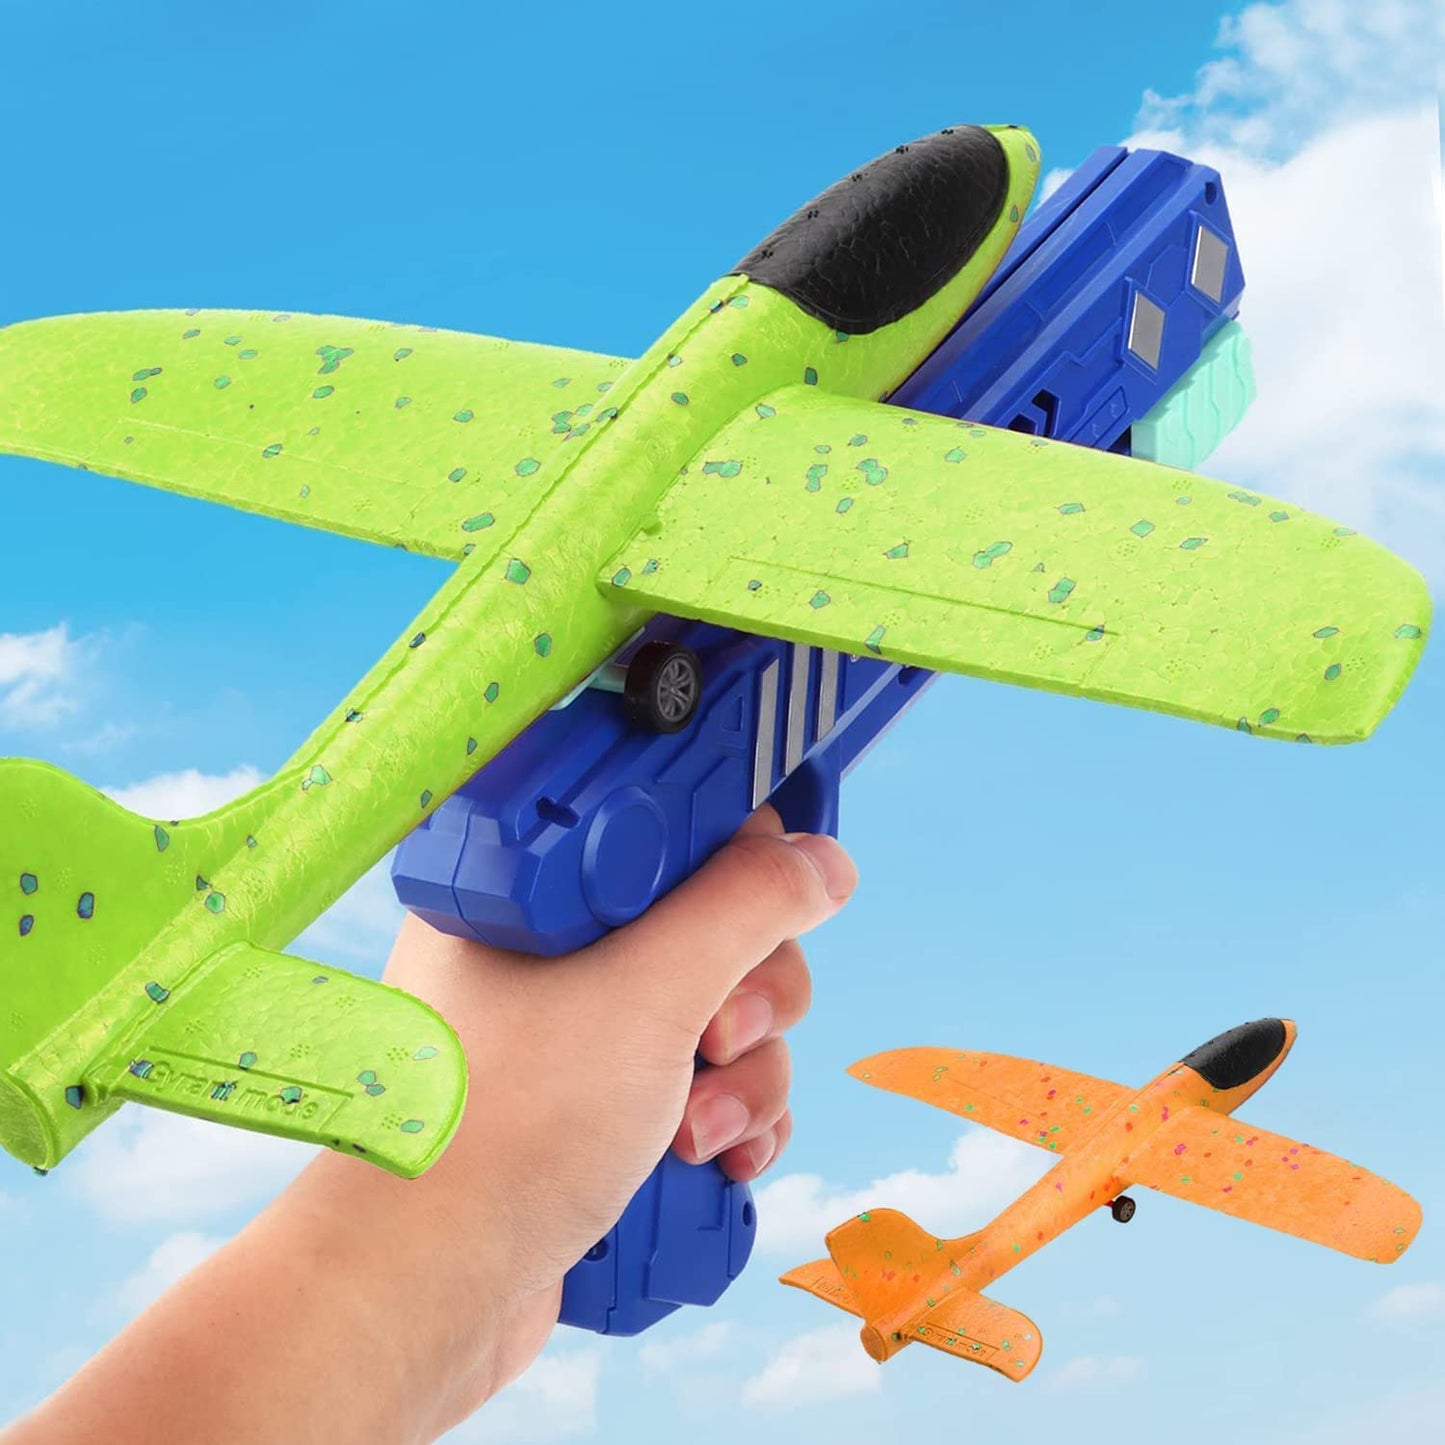 Aircraft launch toys - tkbuynow